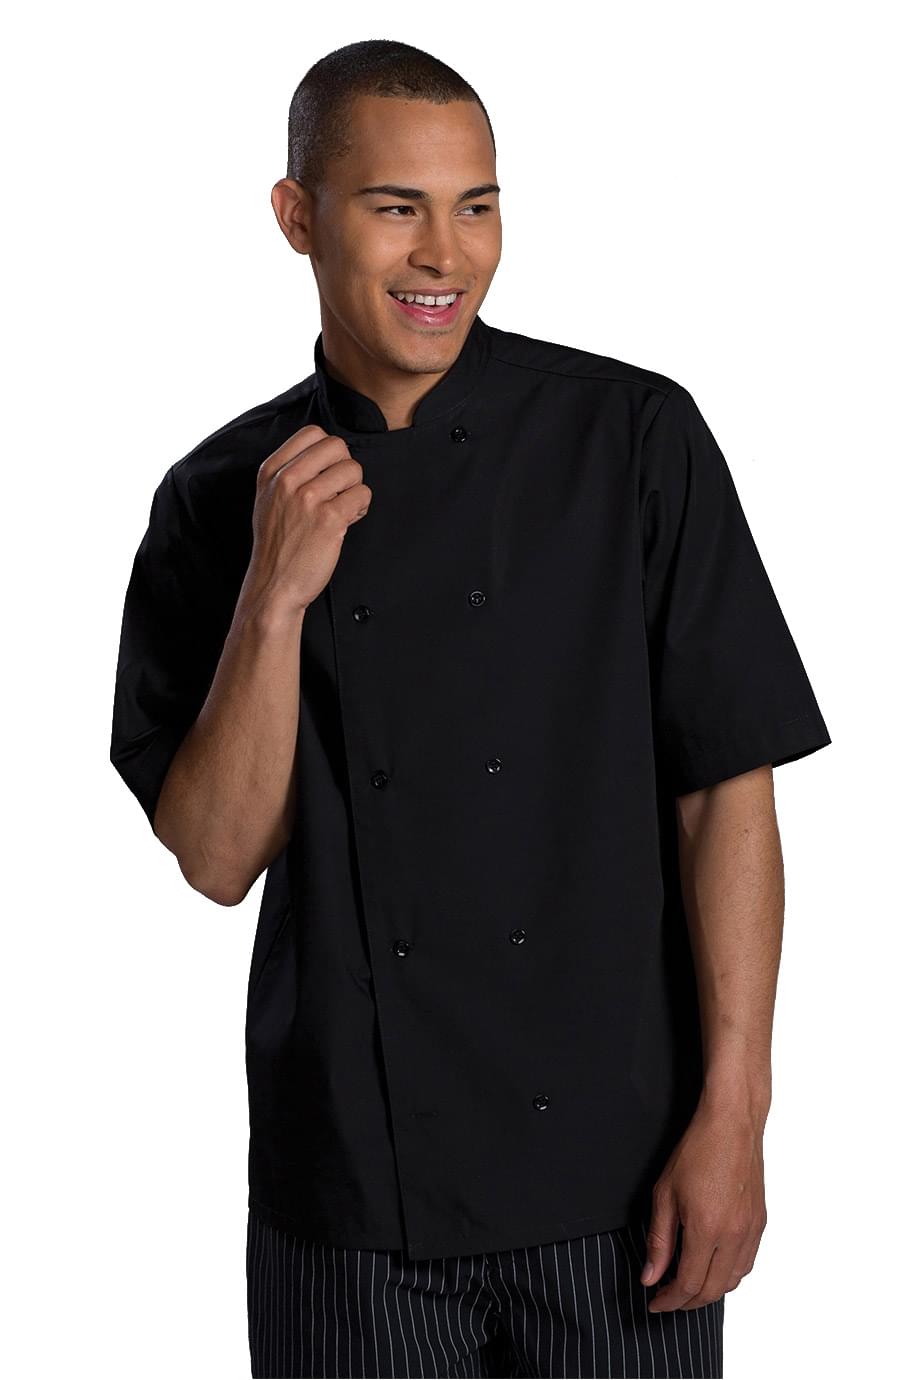 Edwards Garment 1350 - Double Breasted Server Shirt